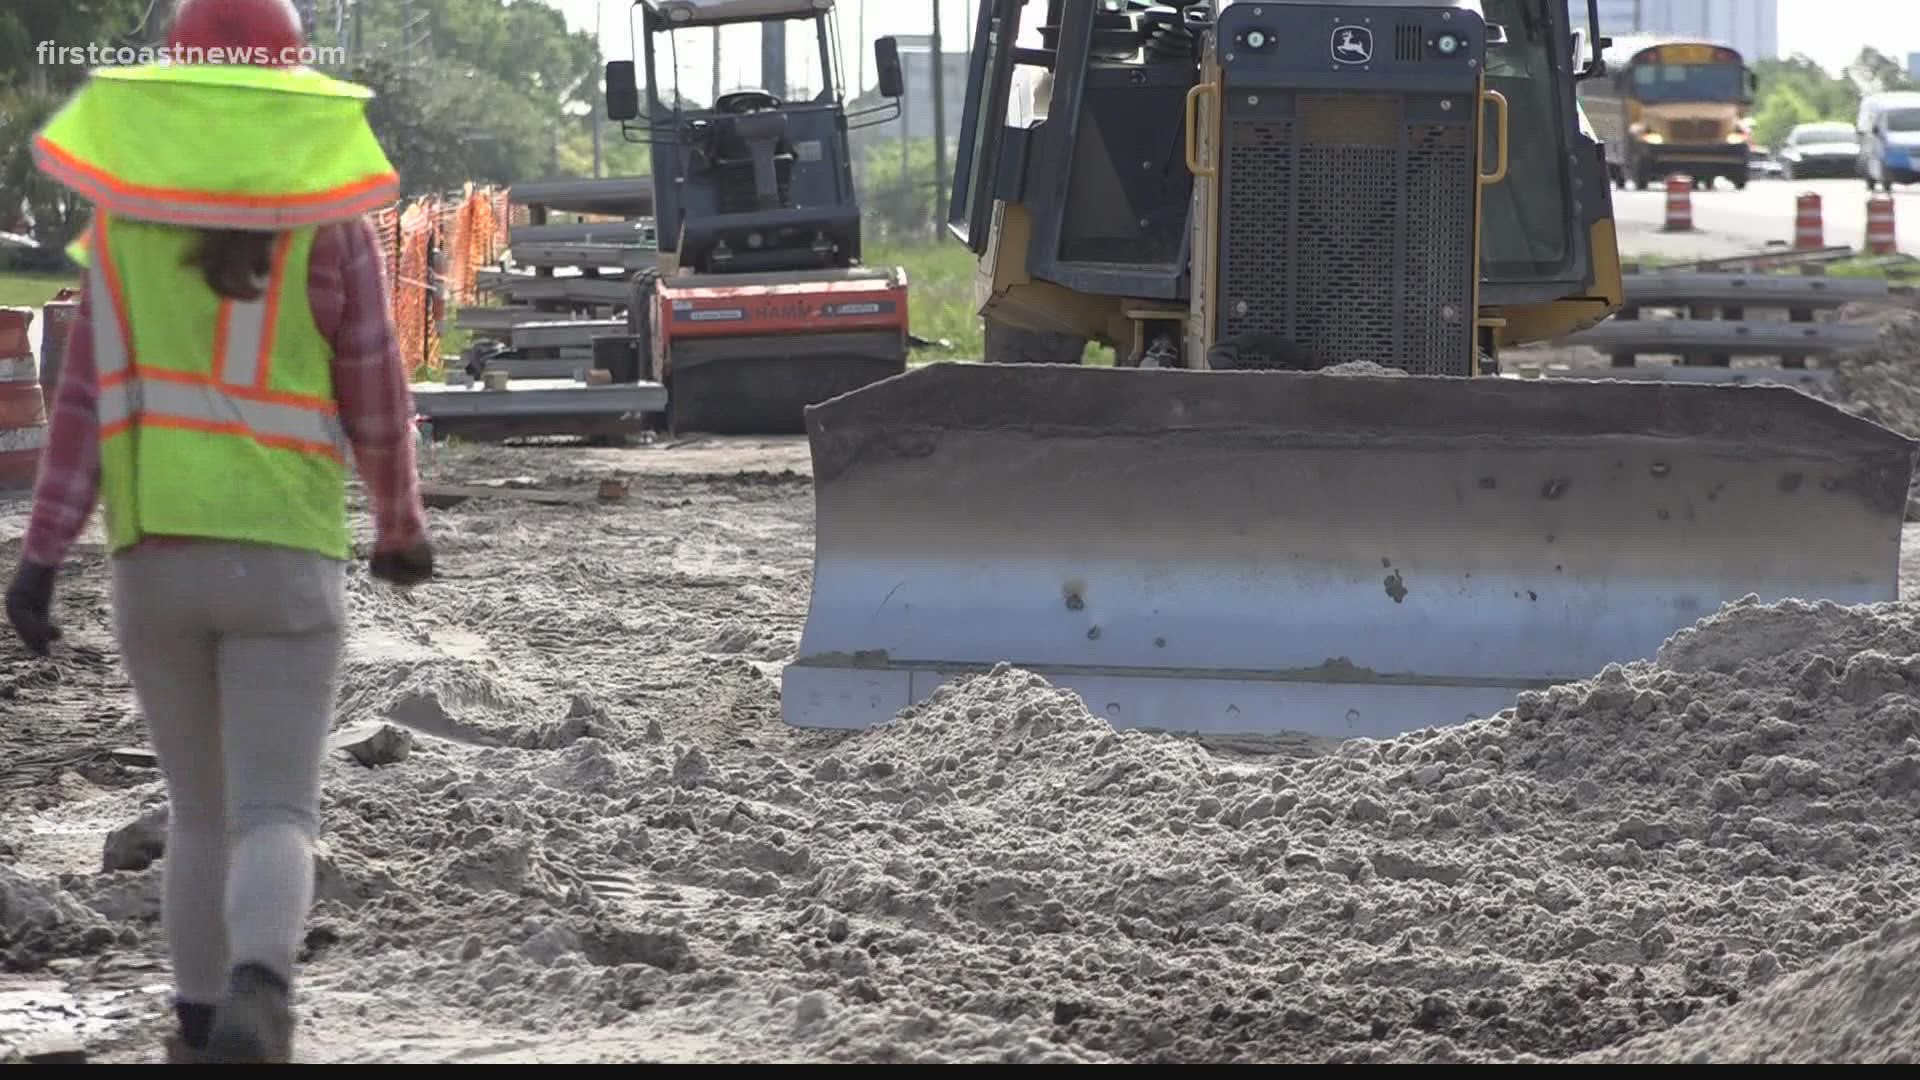 Drive anywhere in Jacksonville and you will likely spot construction barrels. Behind those barrels, though, are workers hoping drivers will be alert and slow down.